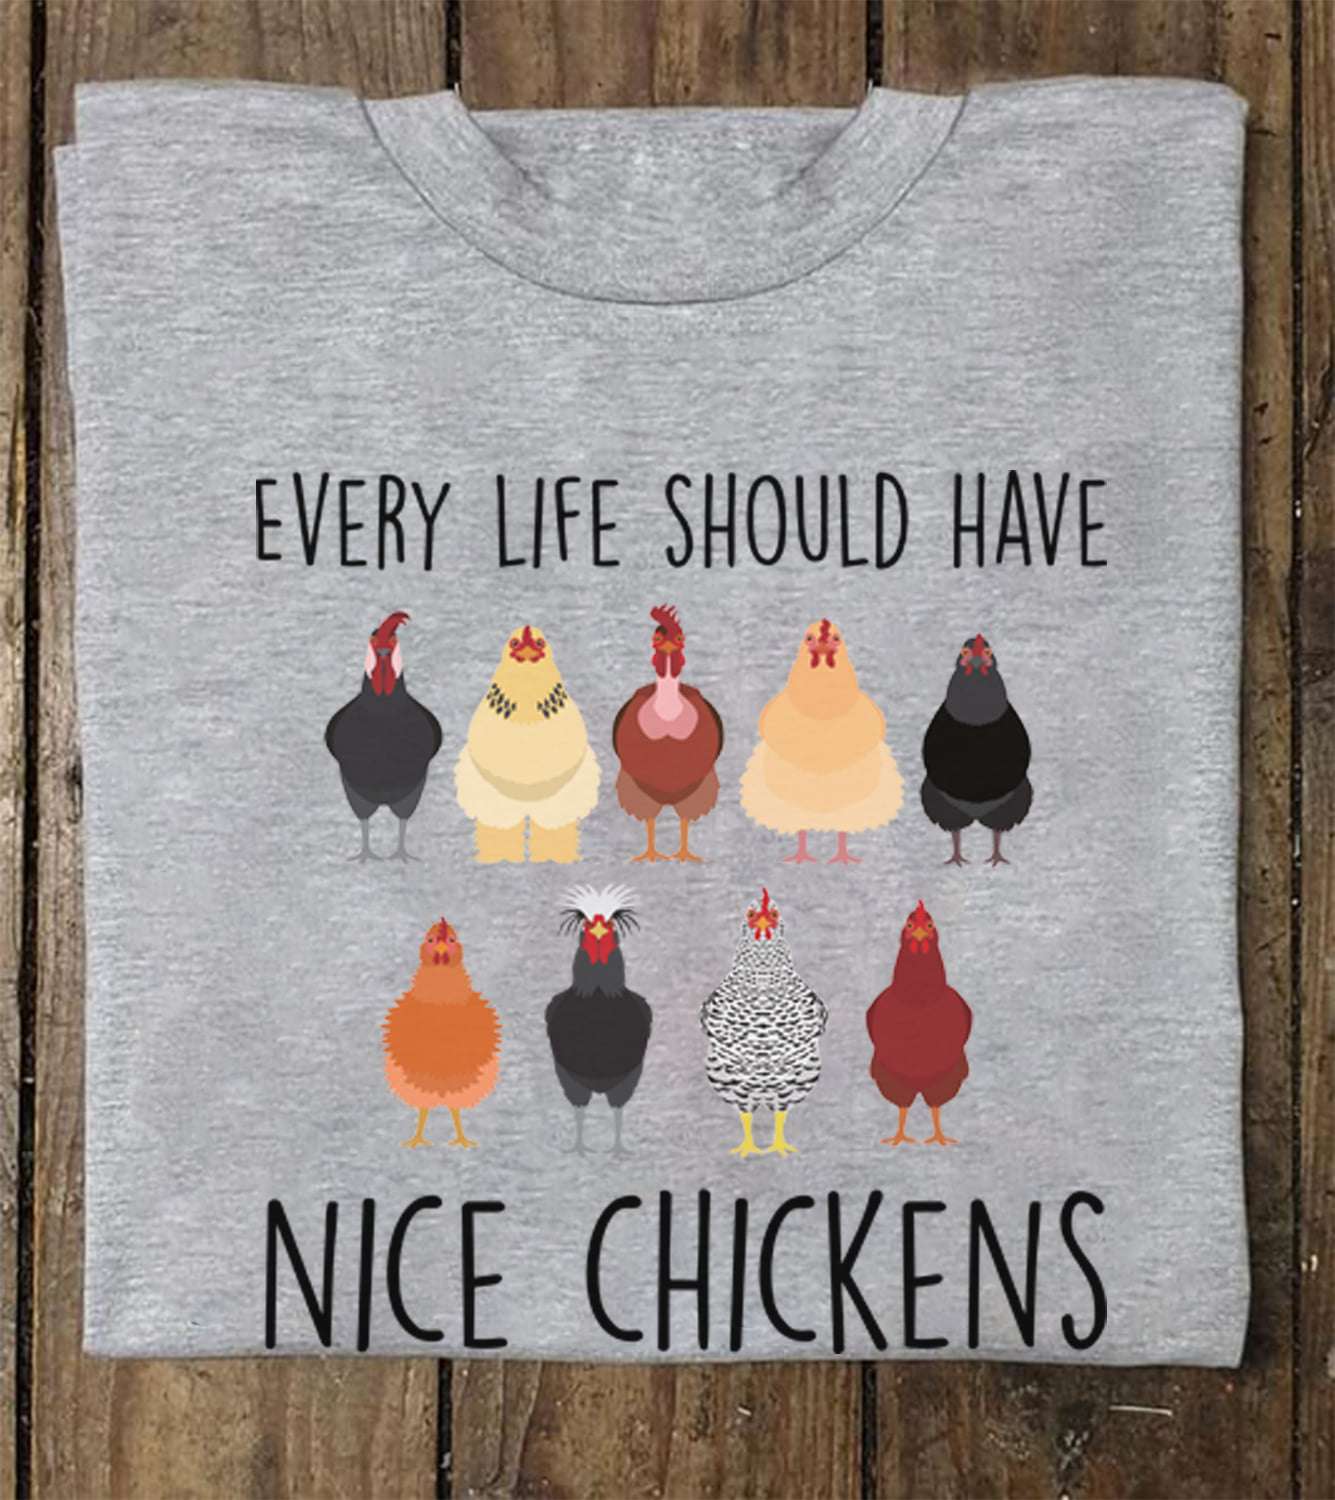 Every life should have nice chickens - Nice chickens for life